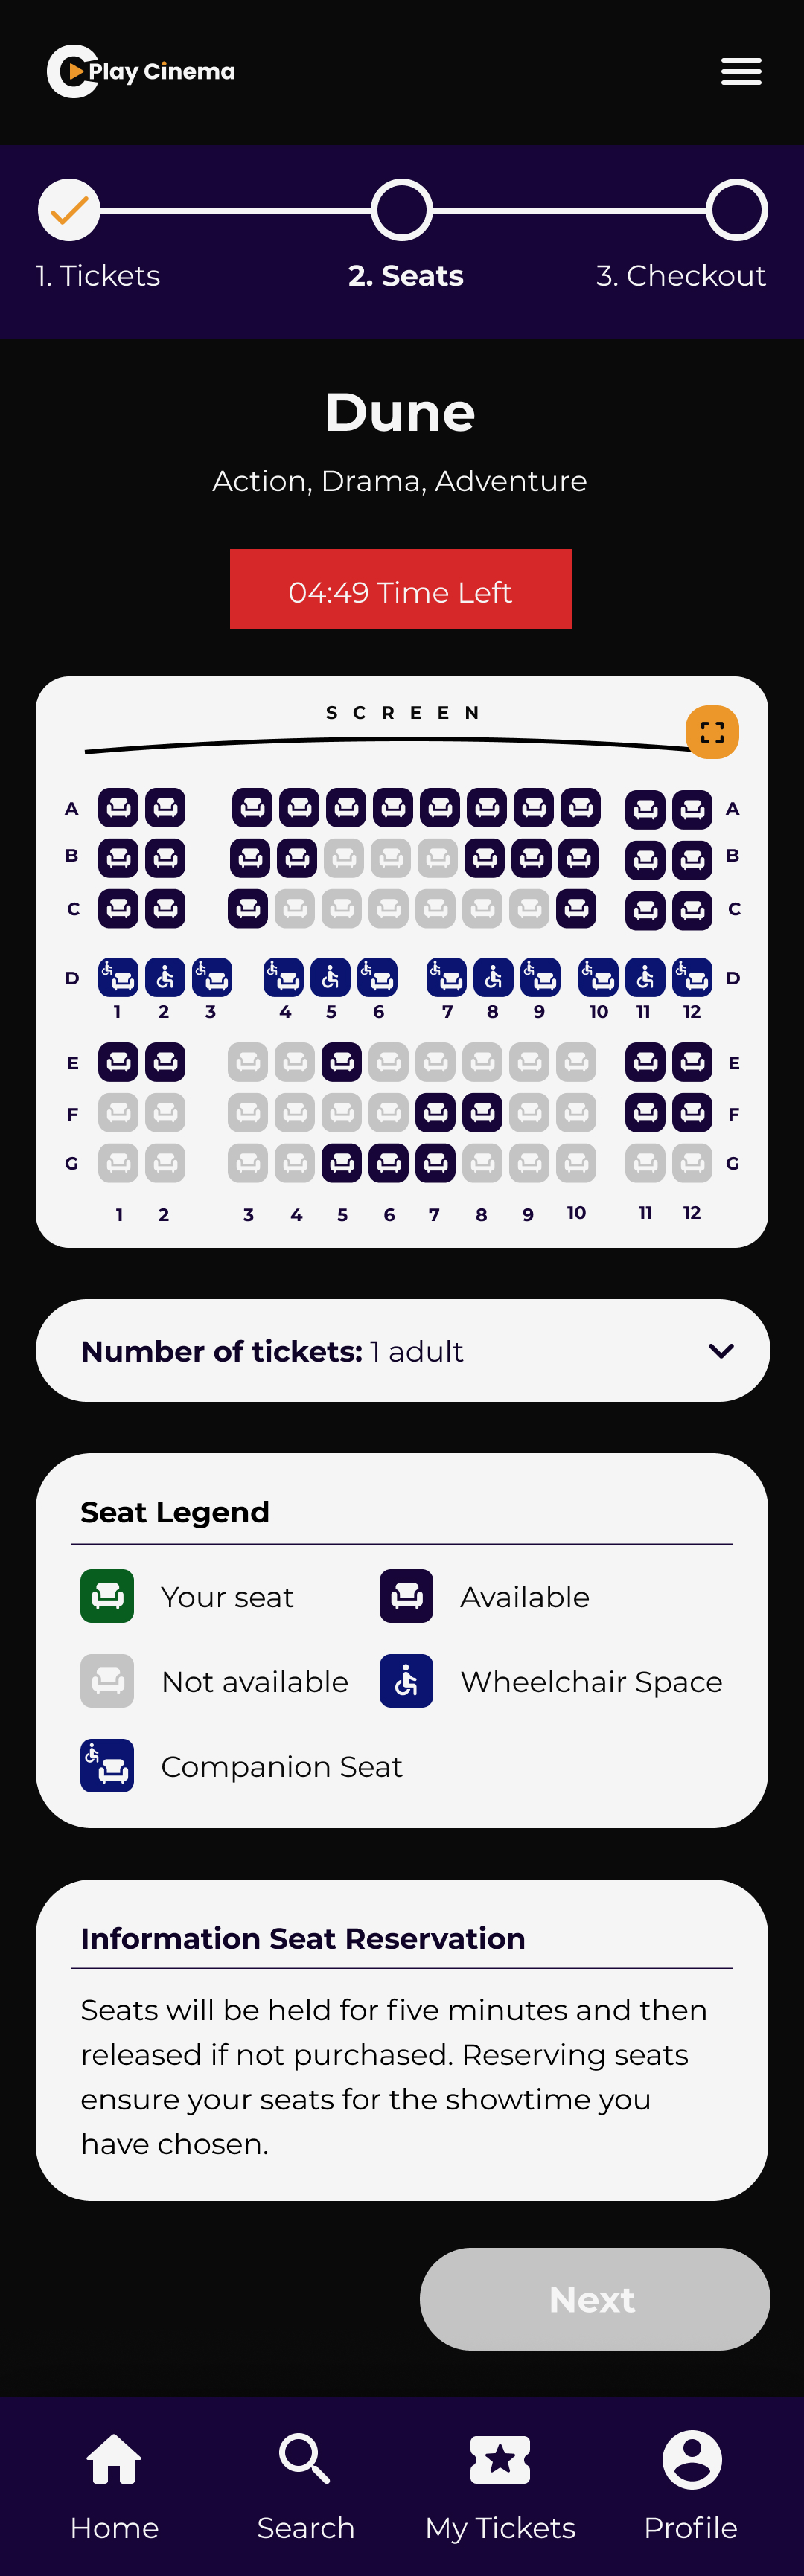 Play Cinema Seats reservation screen for mobile